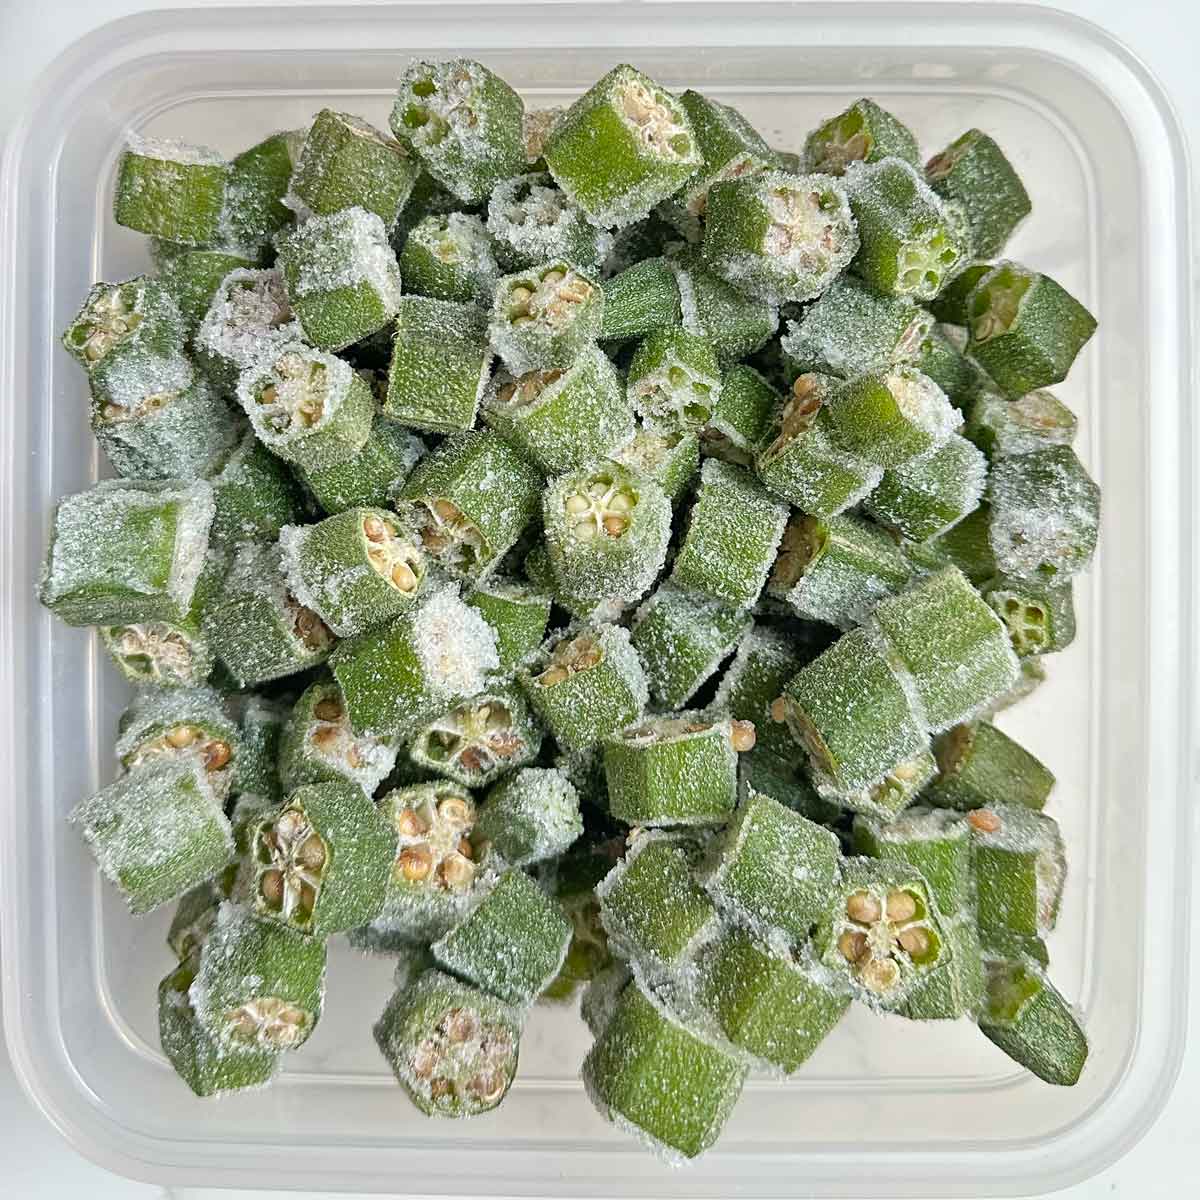 frozen okra in a container.